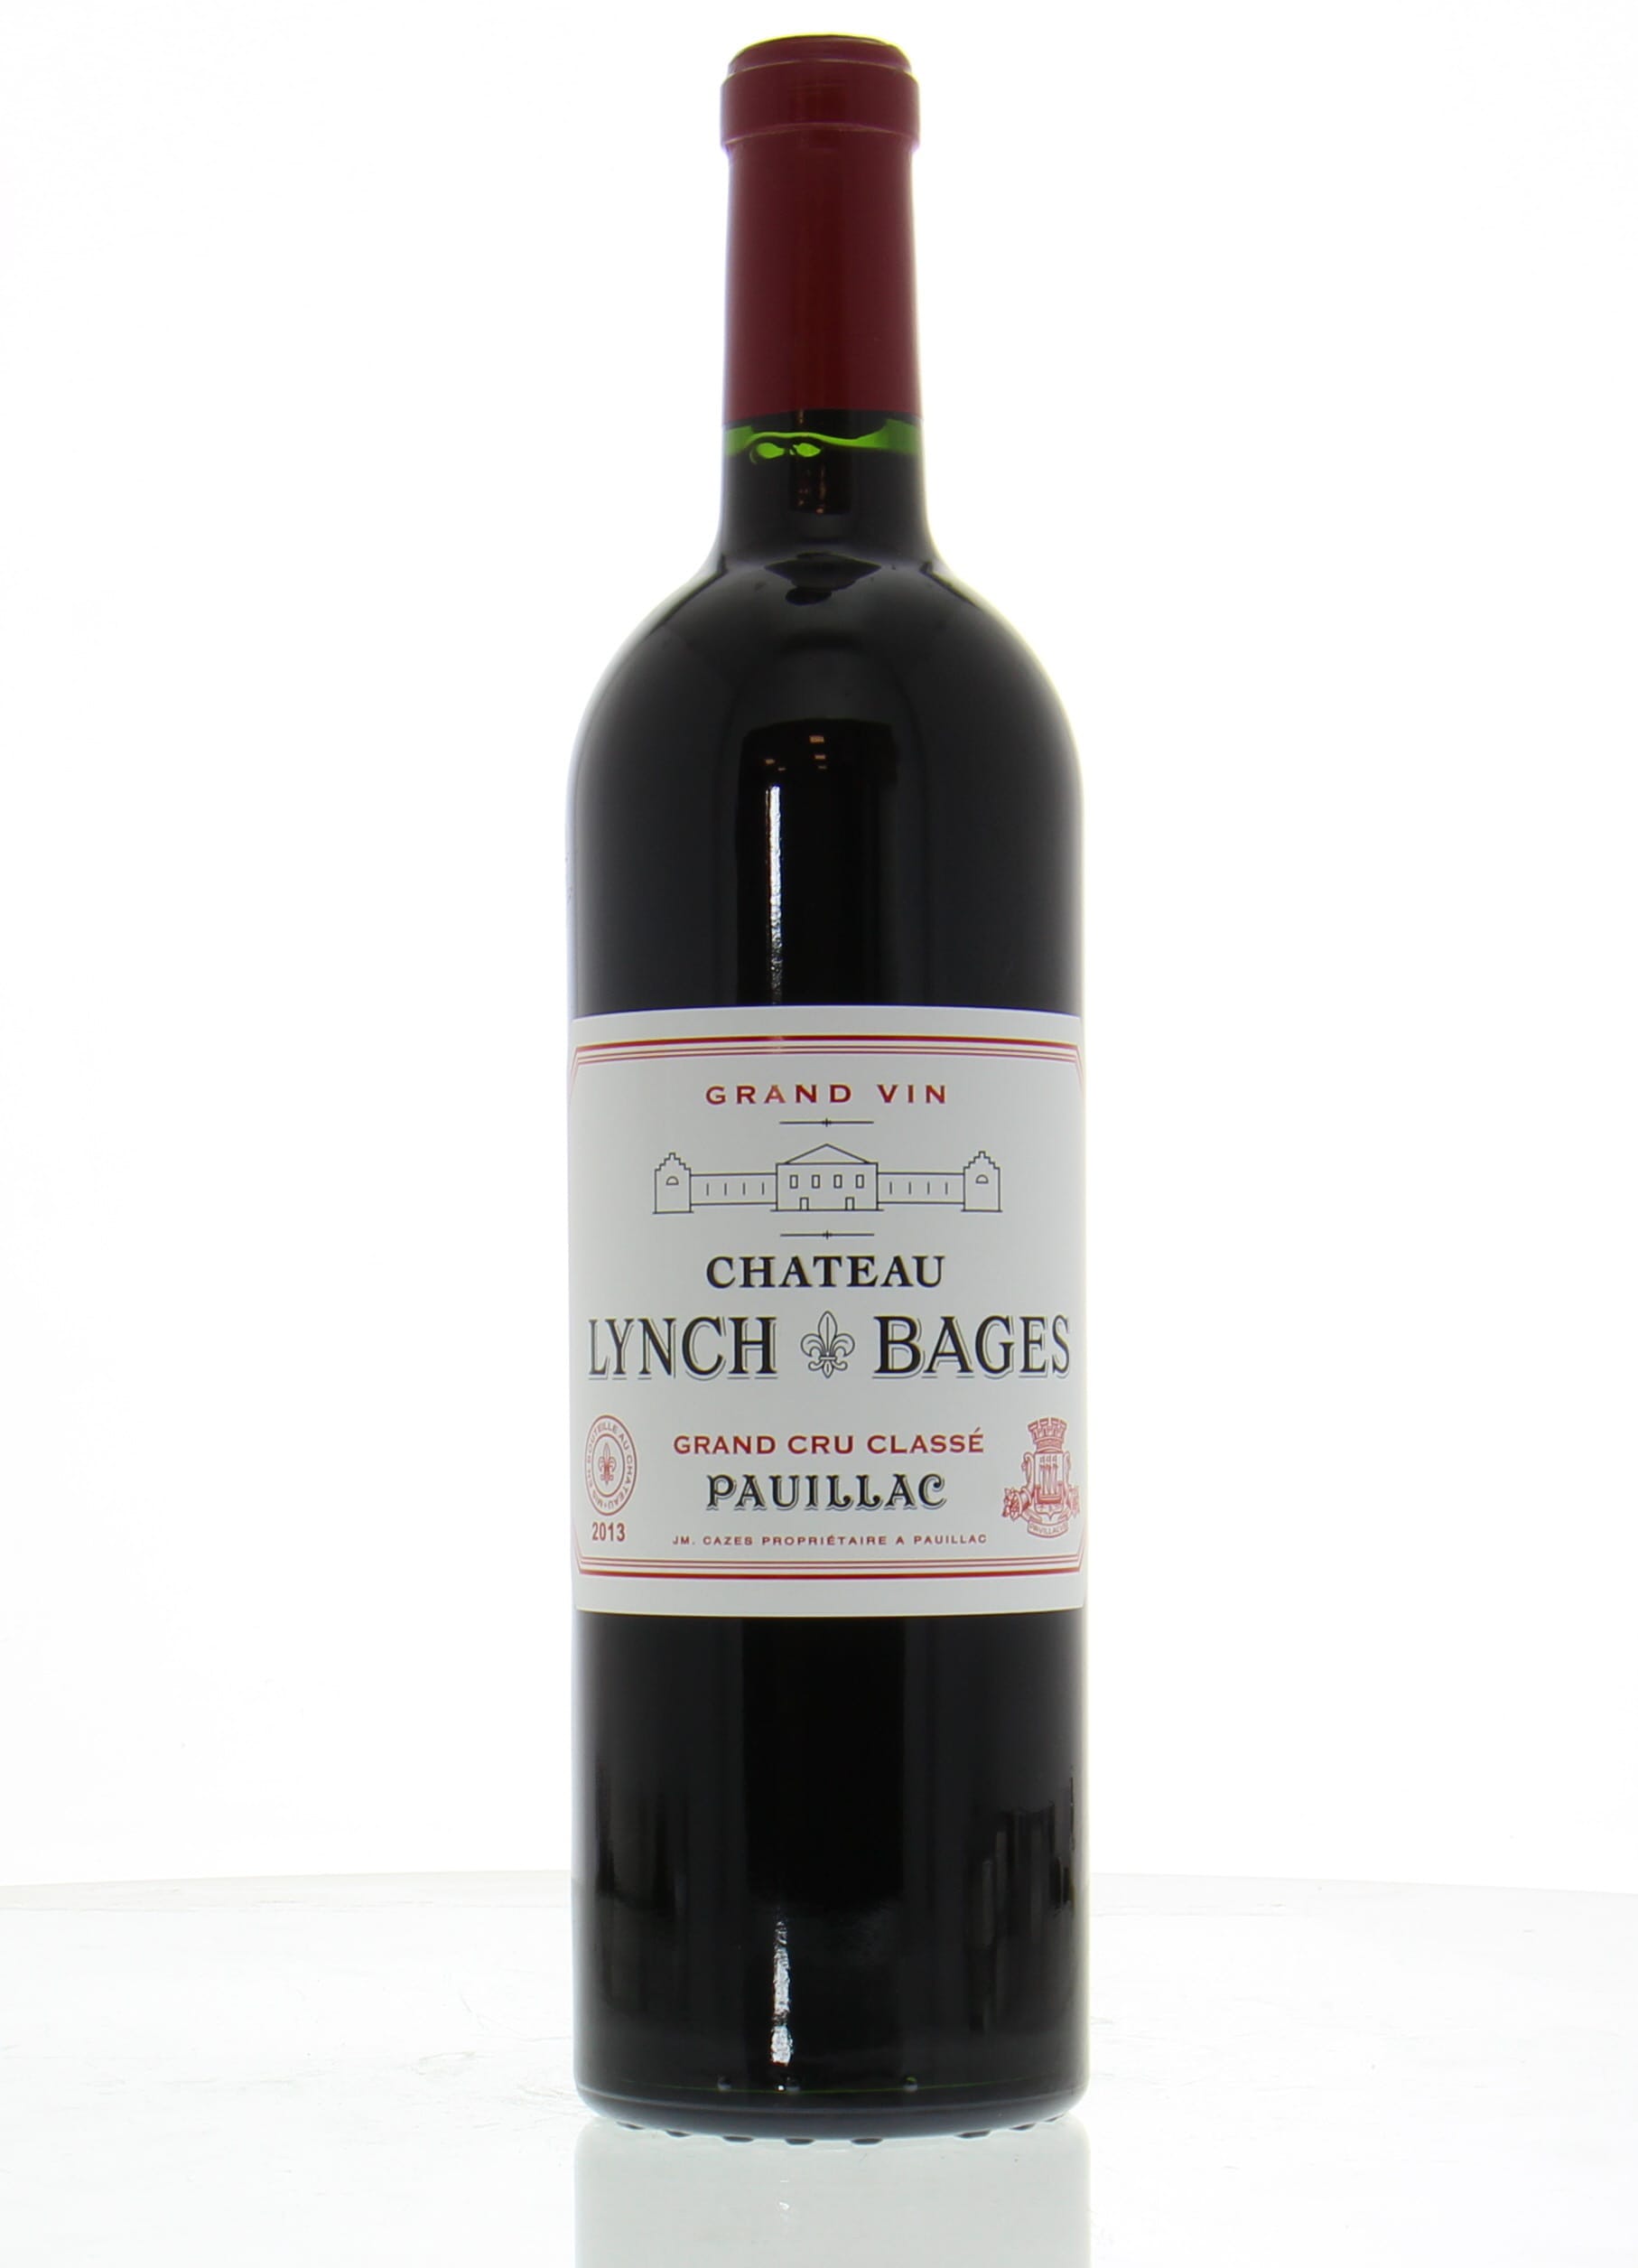 Chateau Lynch Bages - Chateau Lynch Bages 2013 Perfect